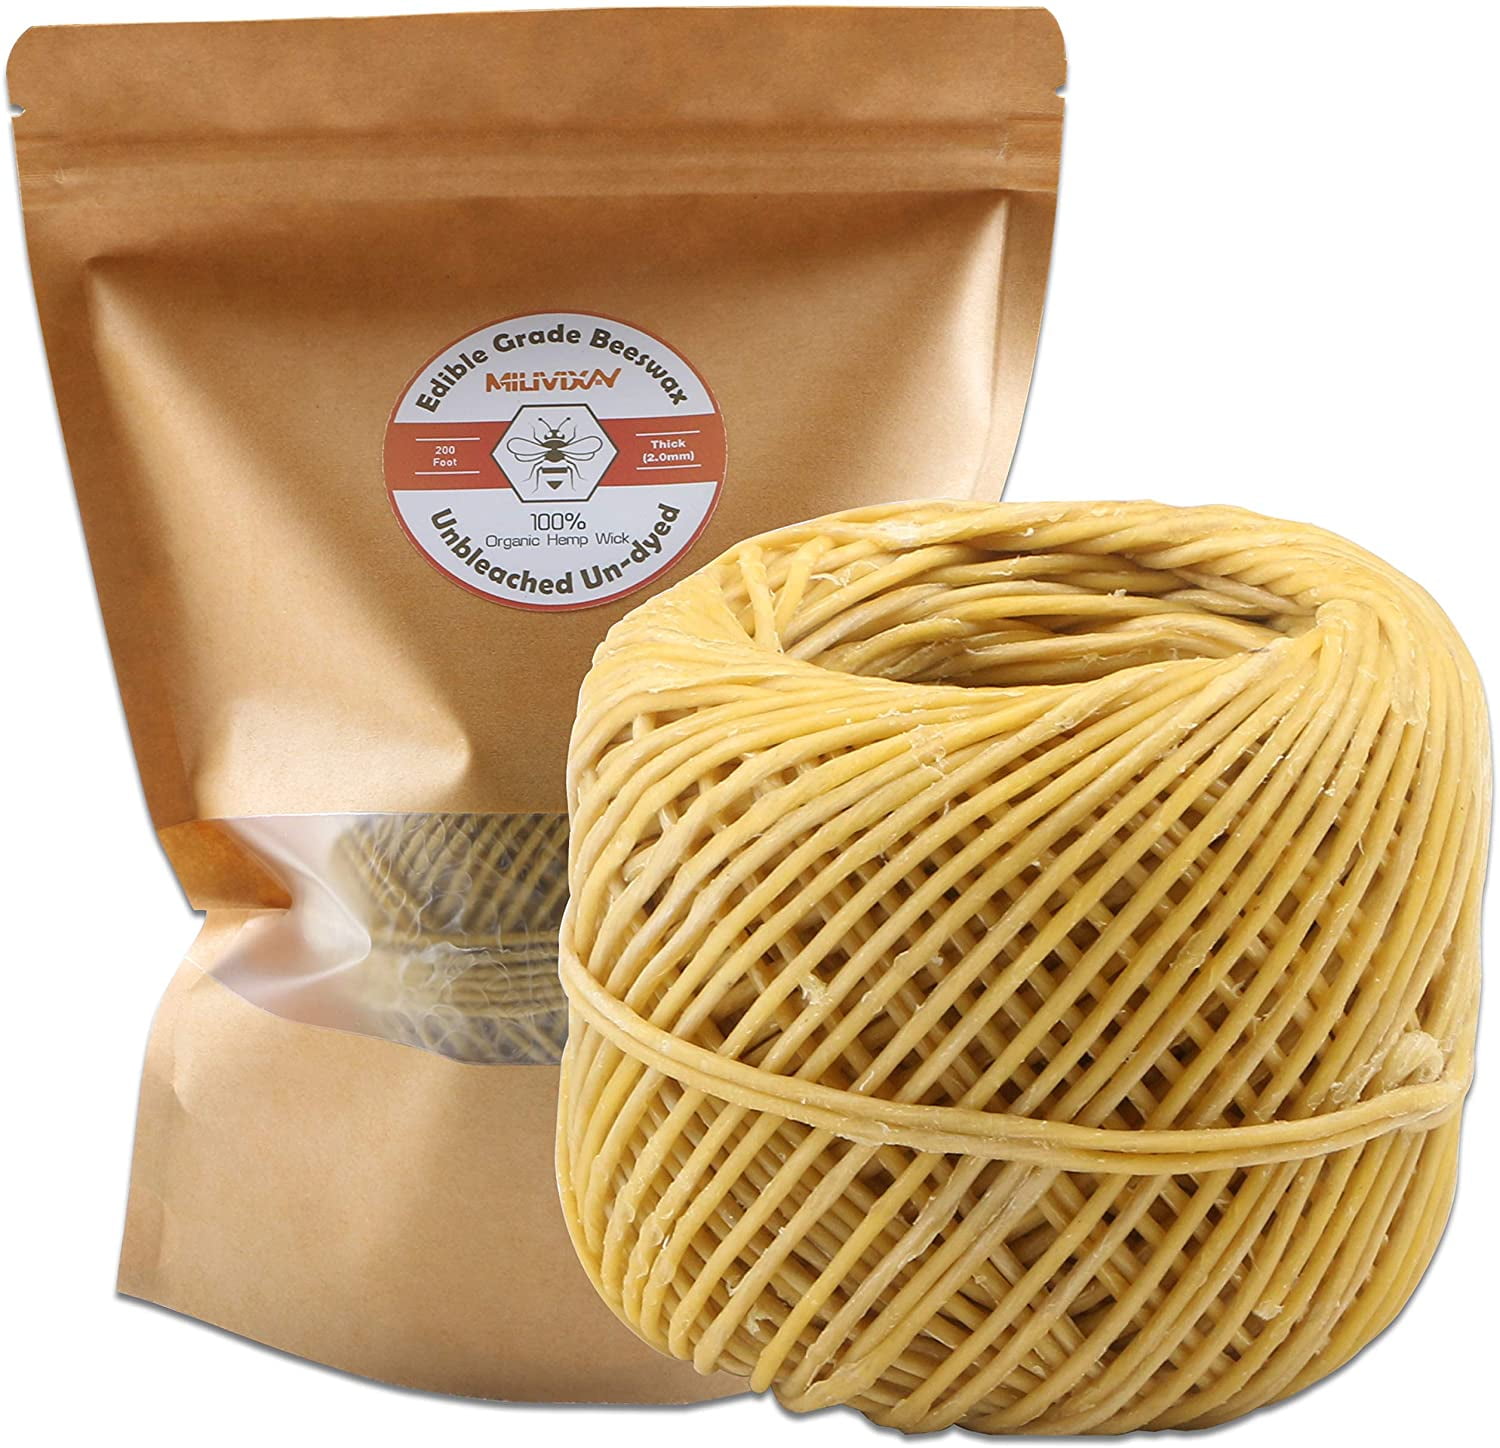 Hemp Candle Wicks 8 inch 2.5mm Beeswax Candle Wicks Thick Candle Wicks Hemp  Wicks Edible Candle Wick Butter Candle Making Wicks 